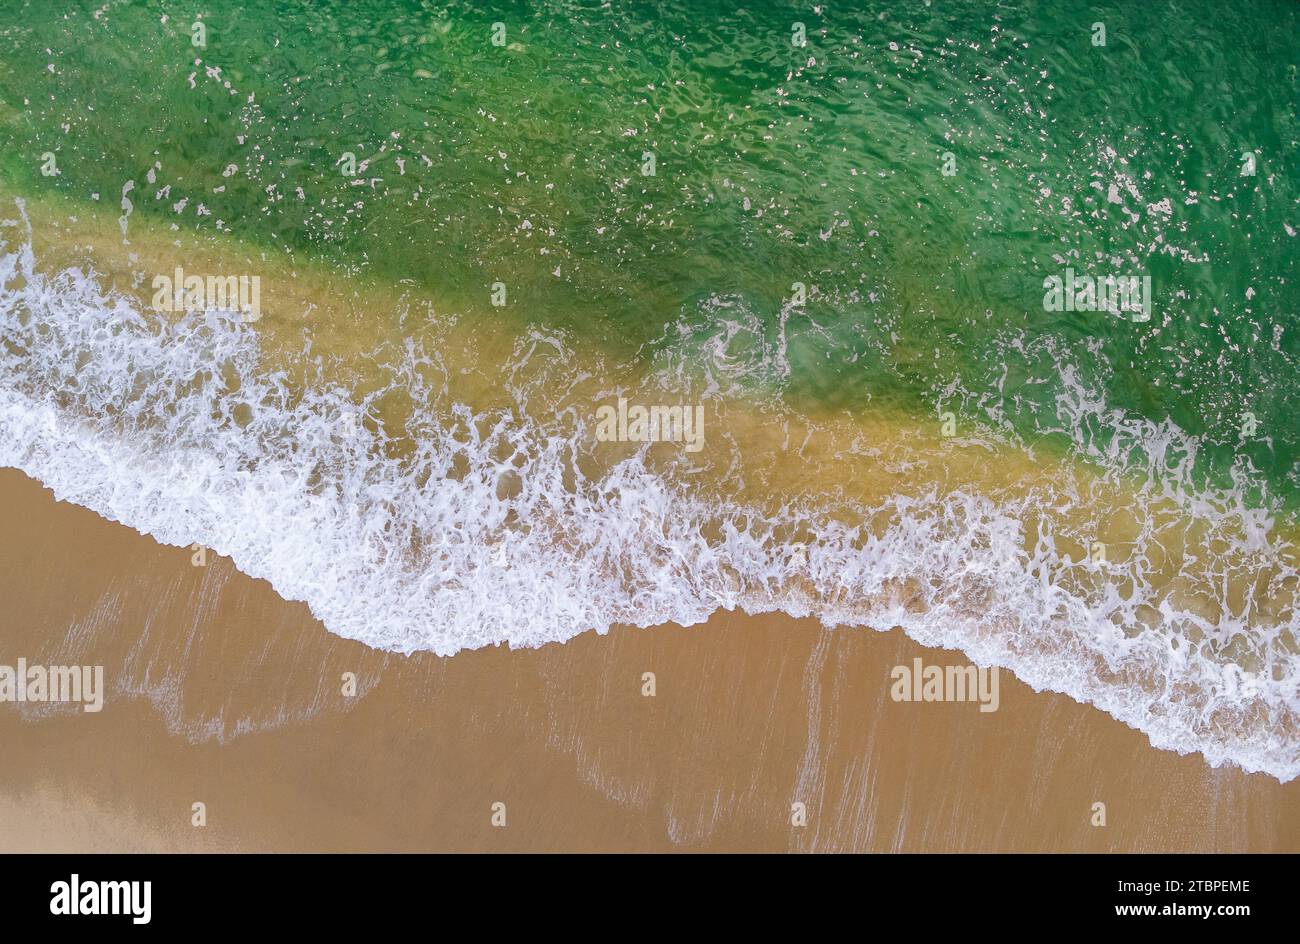 Aerial view of waves crashing on sandy shore, surface ocean waves beach Stock Photo